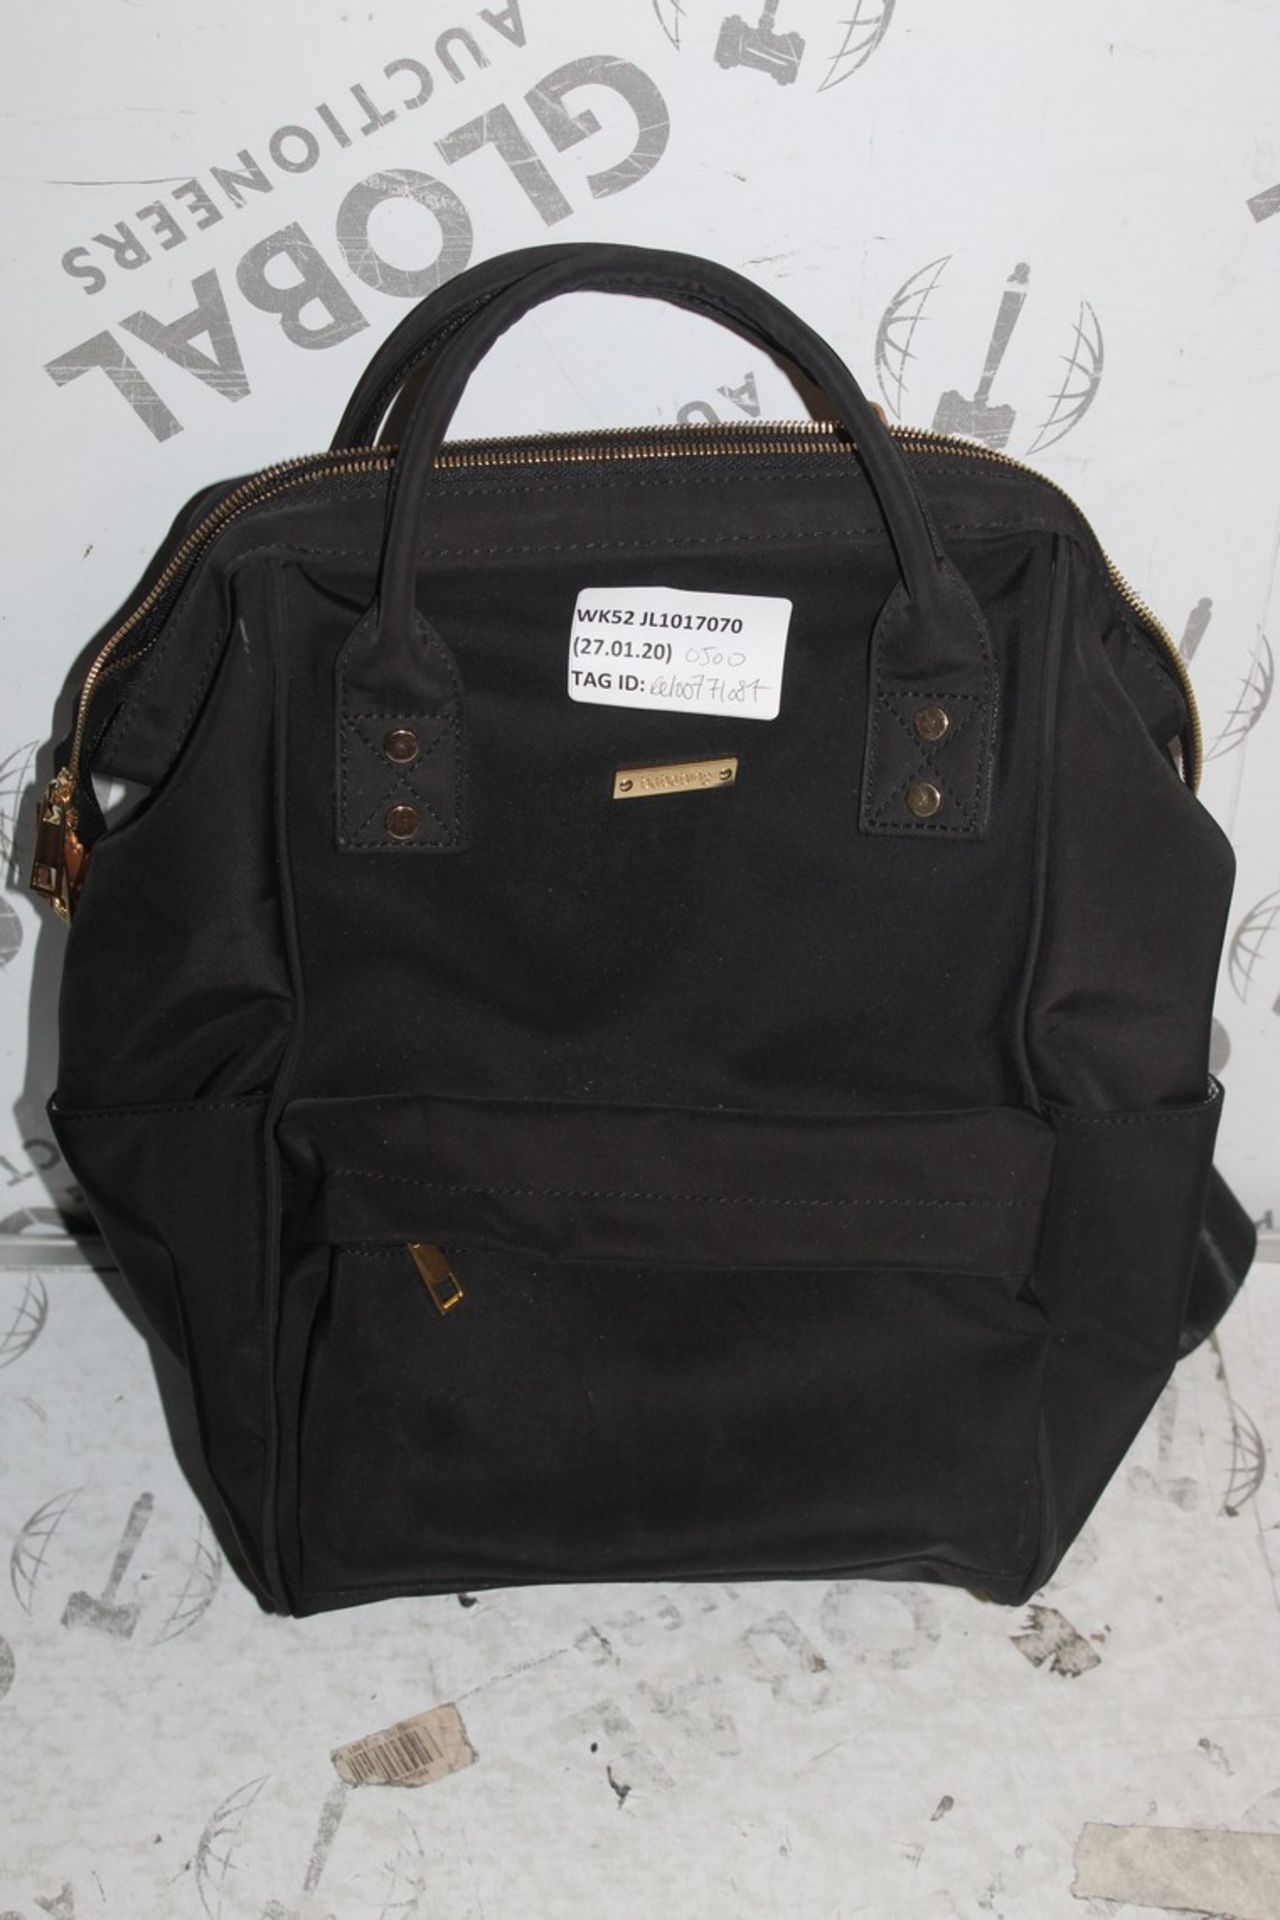 BabaBing Black Childrens Nursery Changing Bag RRP £50 (RET00771084) (Public Viewing and Appraisals